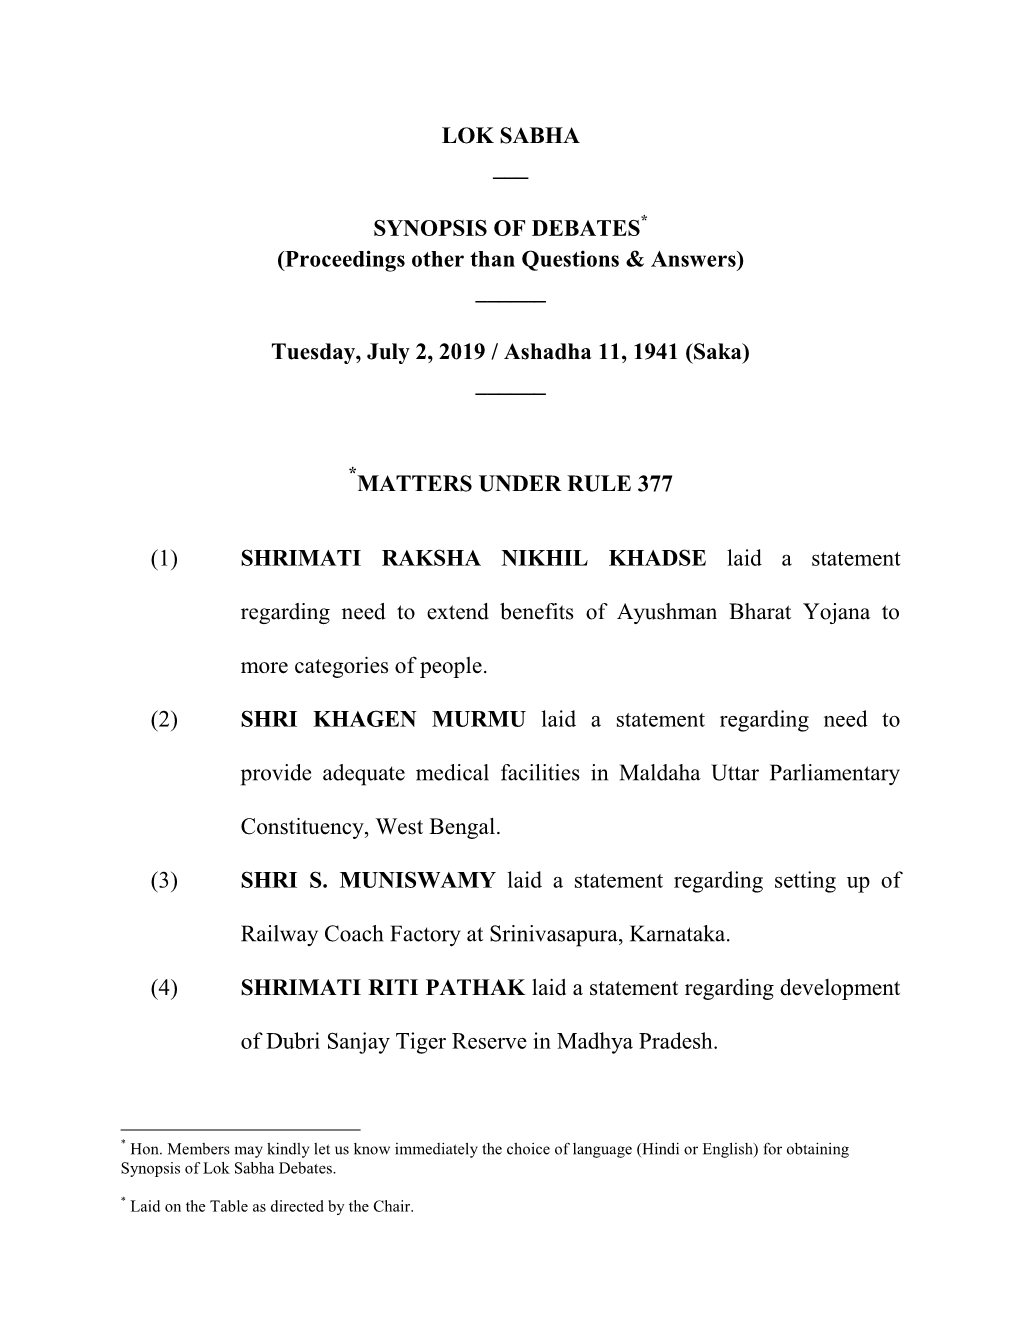 LOK SABHA ___ SYNOPSIS of DEBATES (Proceedings Other Than Questions & Answers) ___Tuesday, July 2, 2019 / Ashadha 11, 19